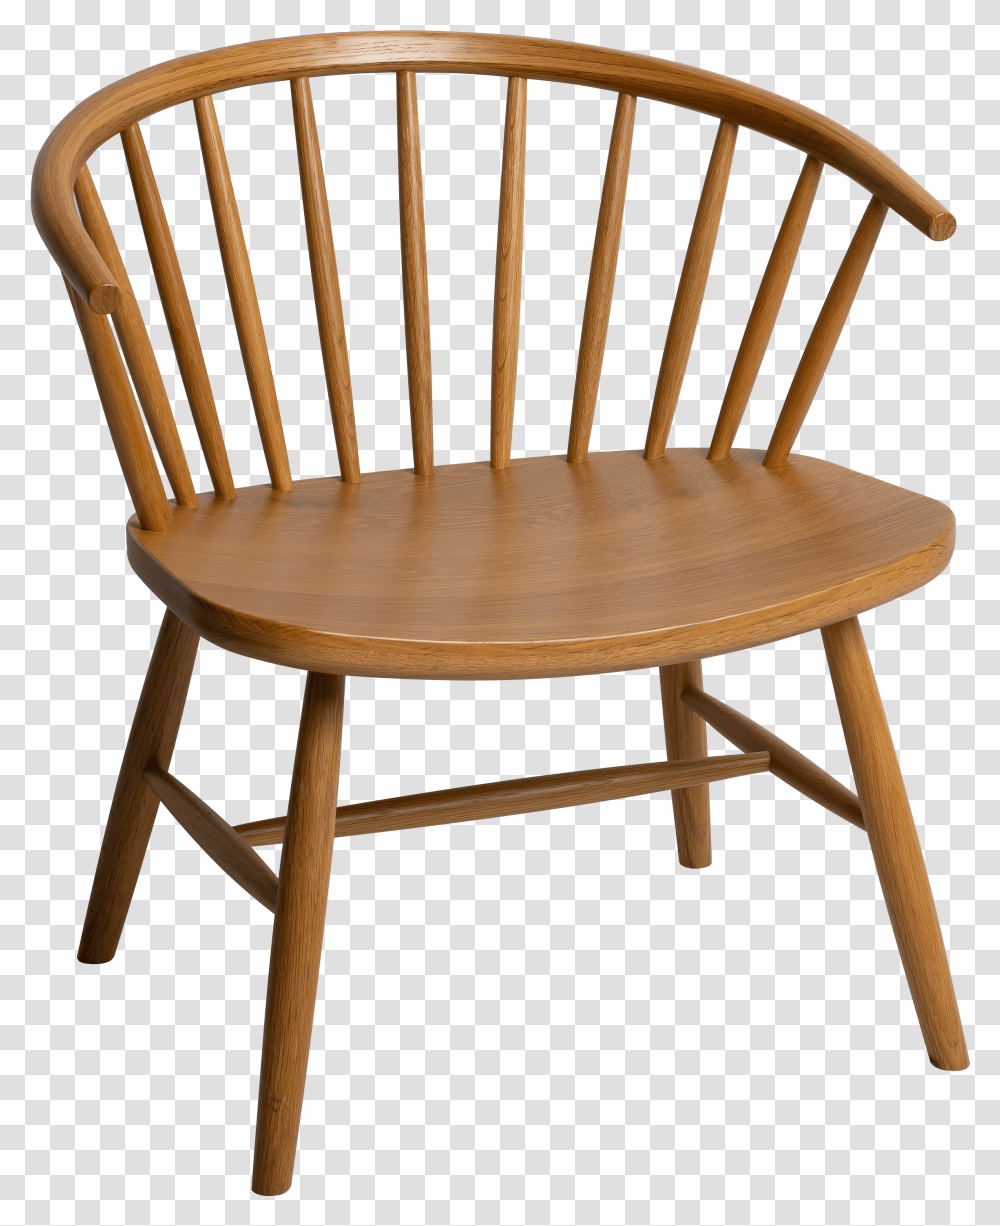 Kitchen Things Made In Wood Transparent Png